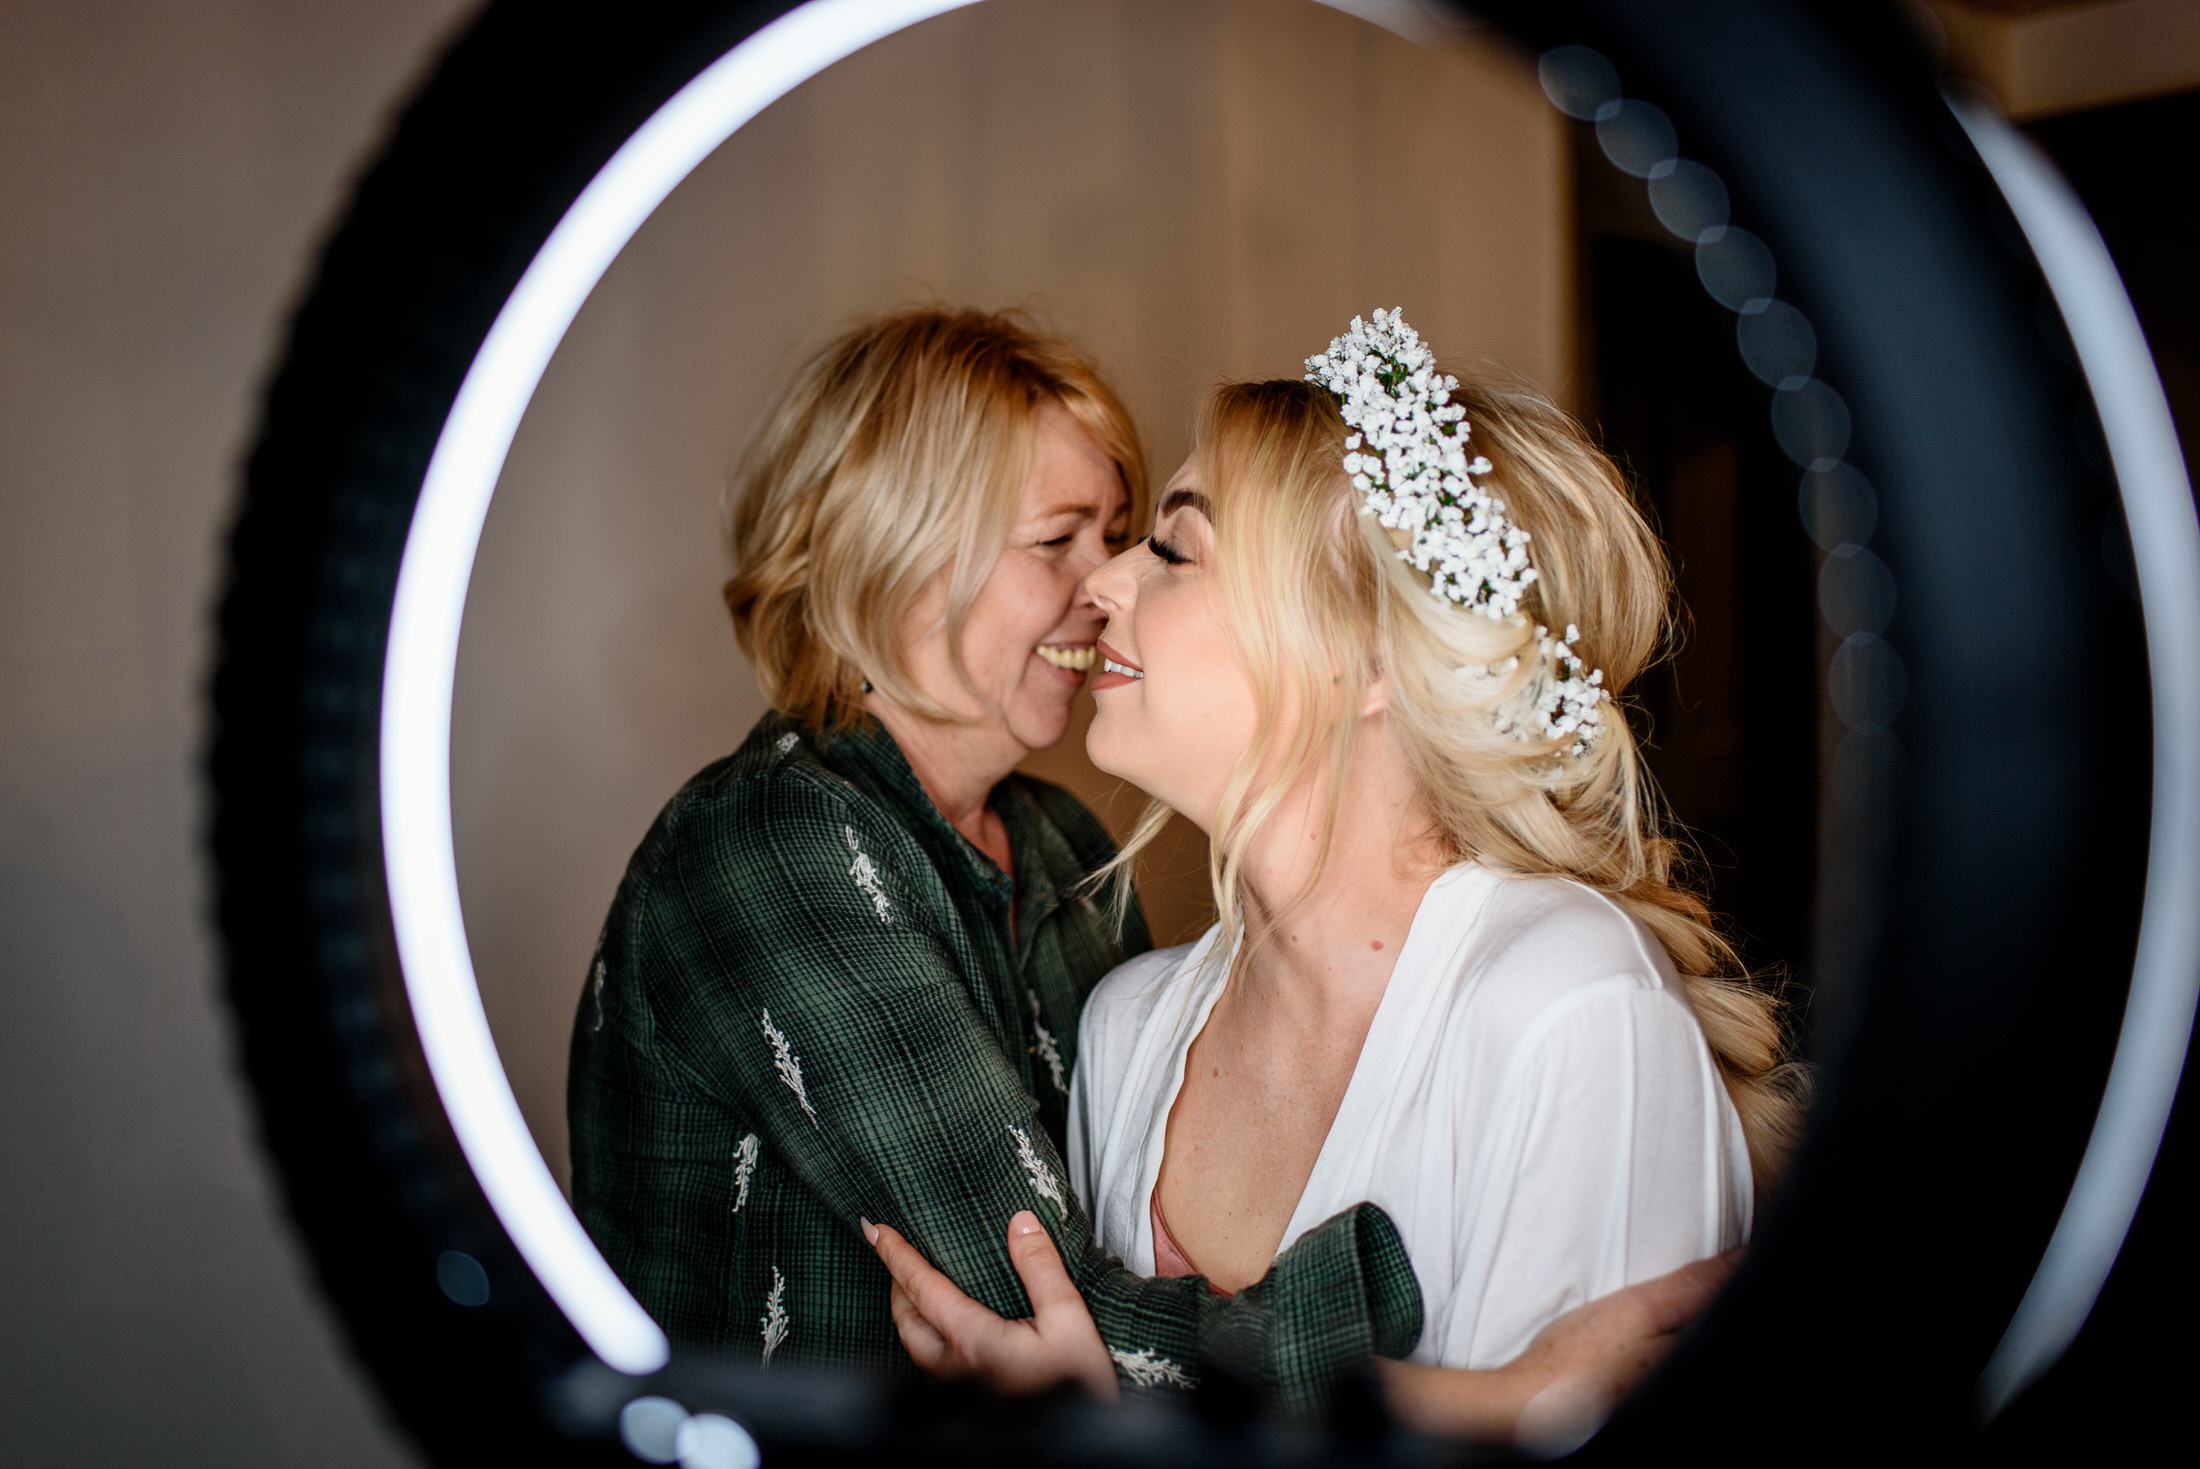 Two women hugging in front of a mirror at a wedding.